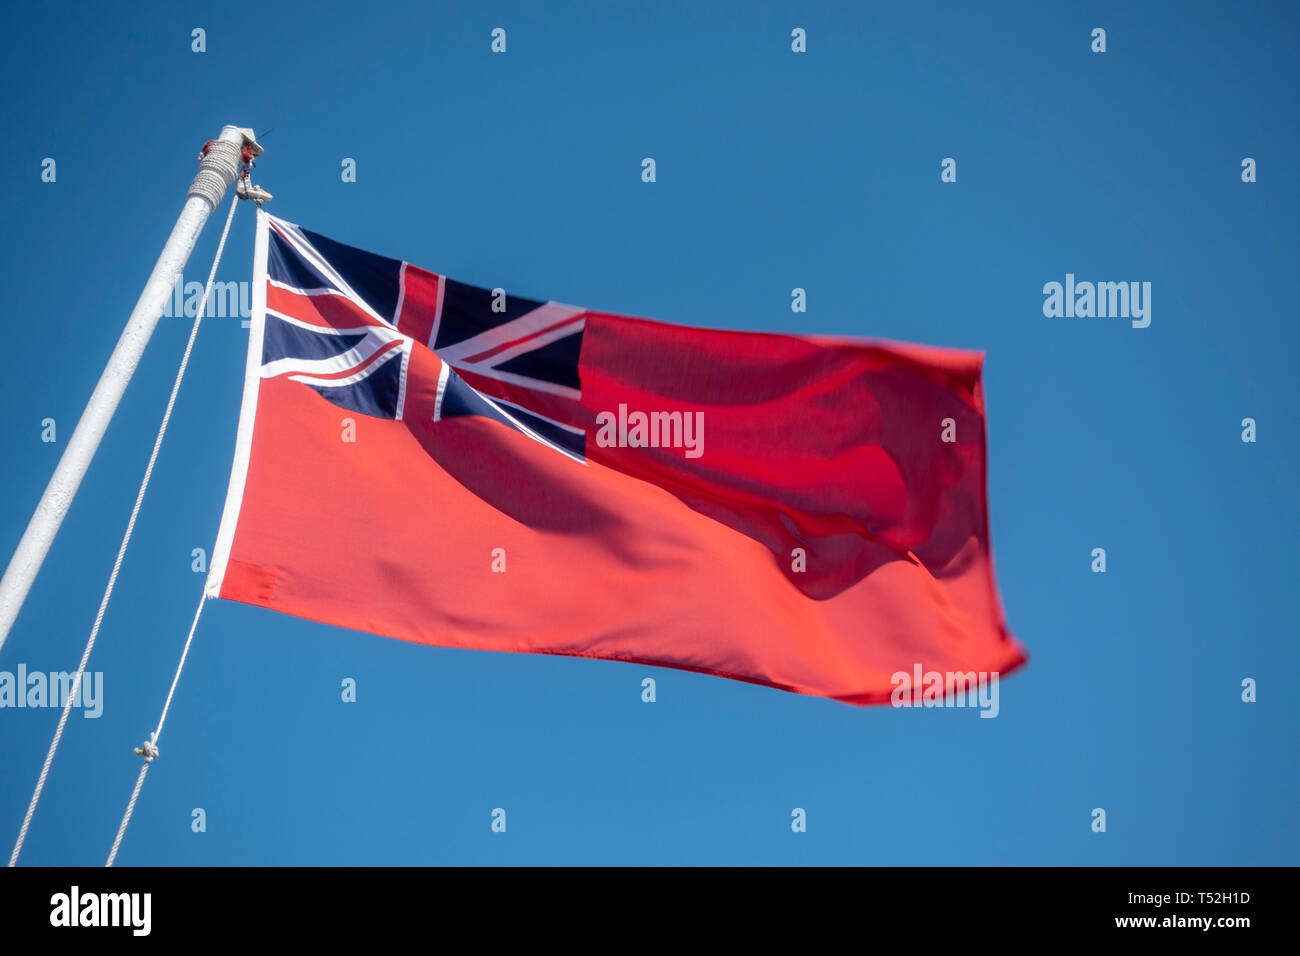 The Red Ensign, as currently used for British civilian vessels, on the stern of the Stena Europe (Stena Line) ferry. Stock Photo